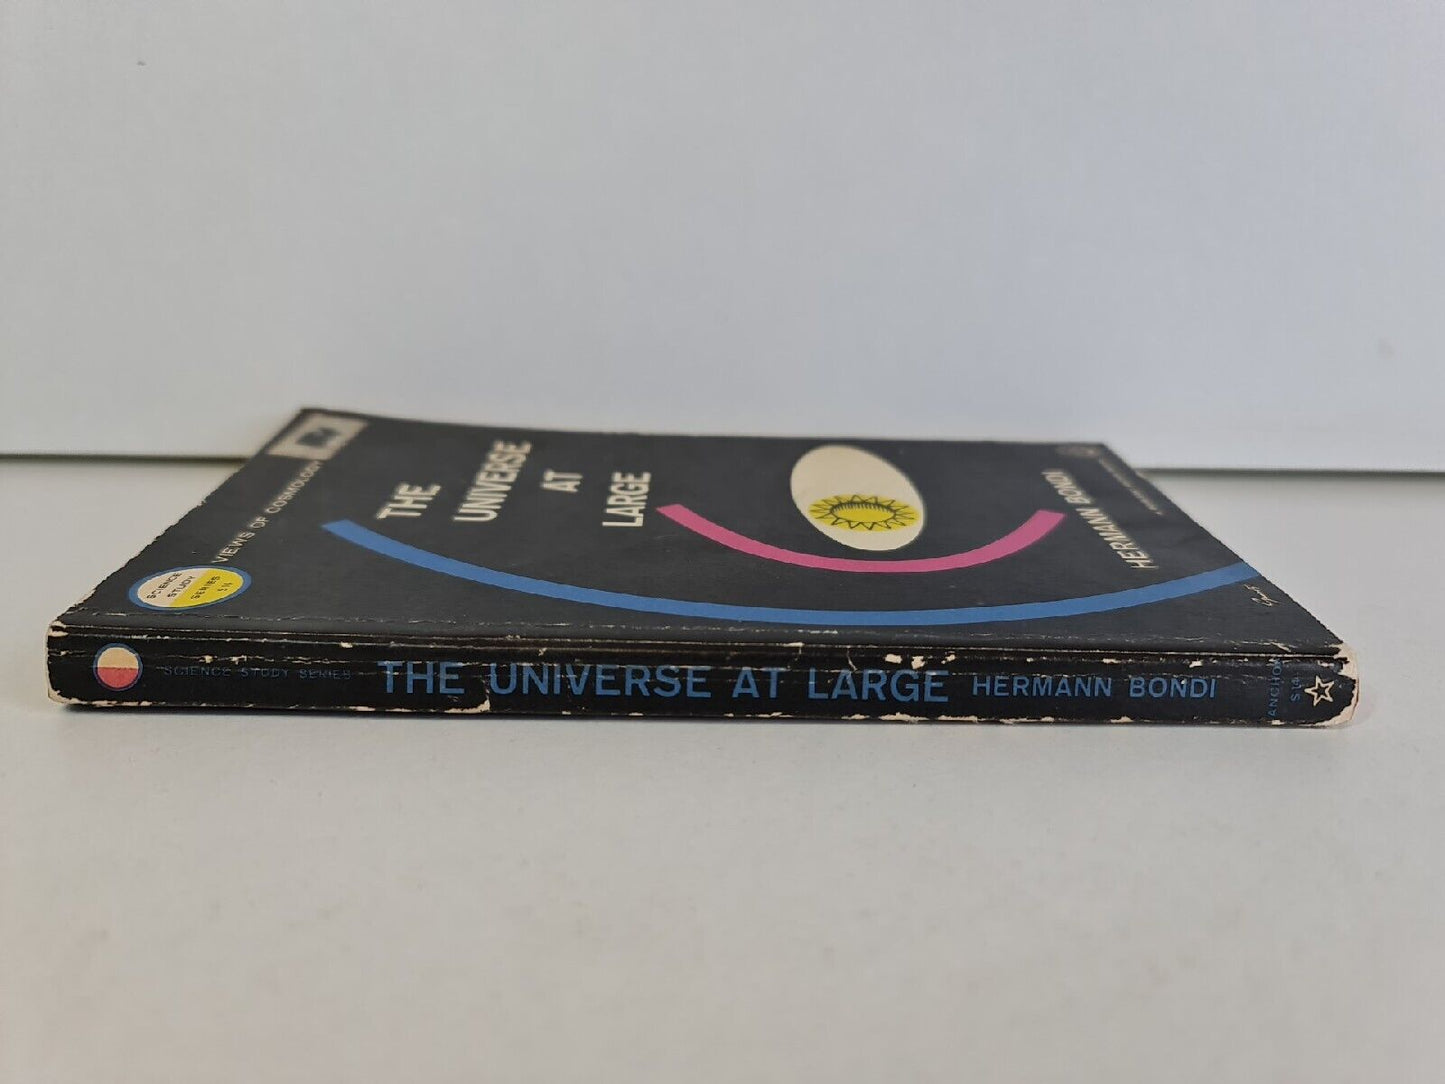 The Universe at Large by Hermann Bondi (1960) Science Study Series